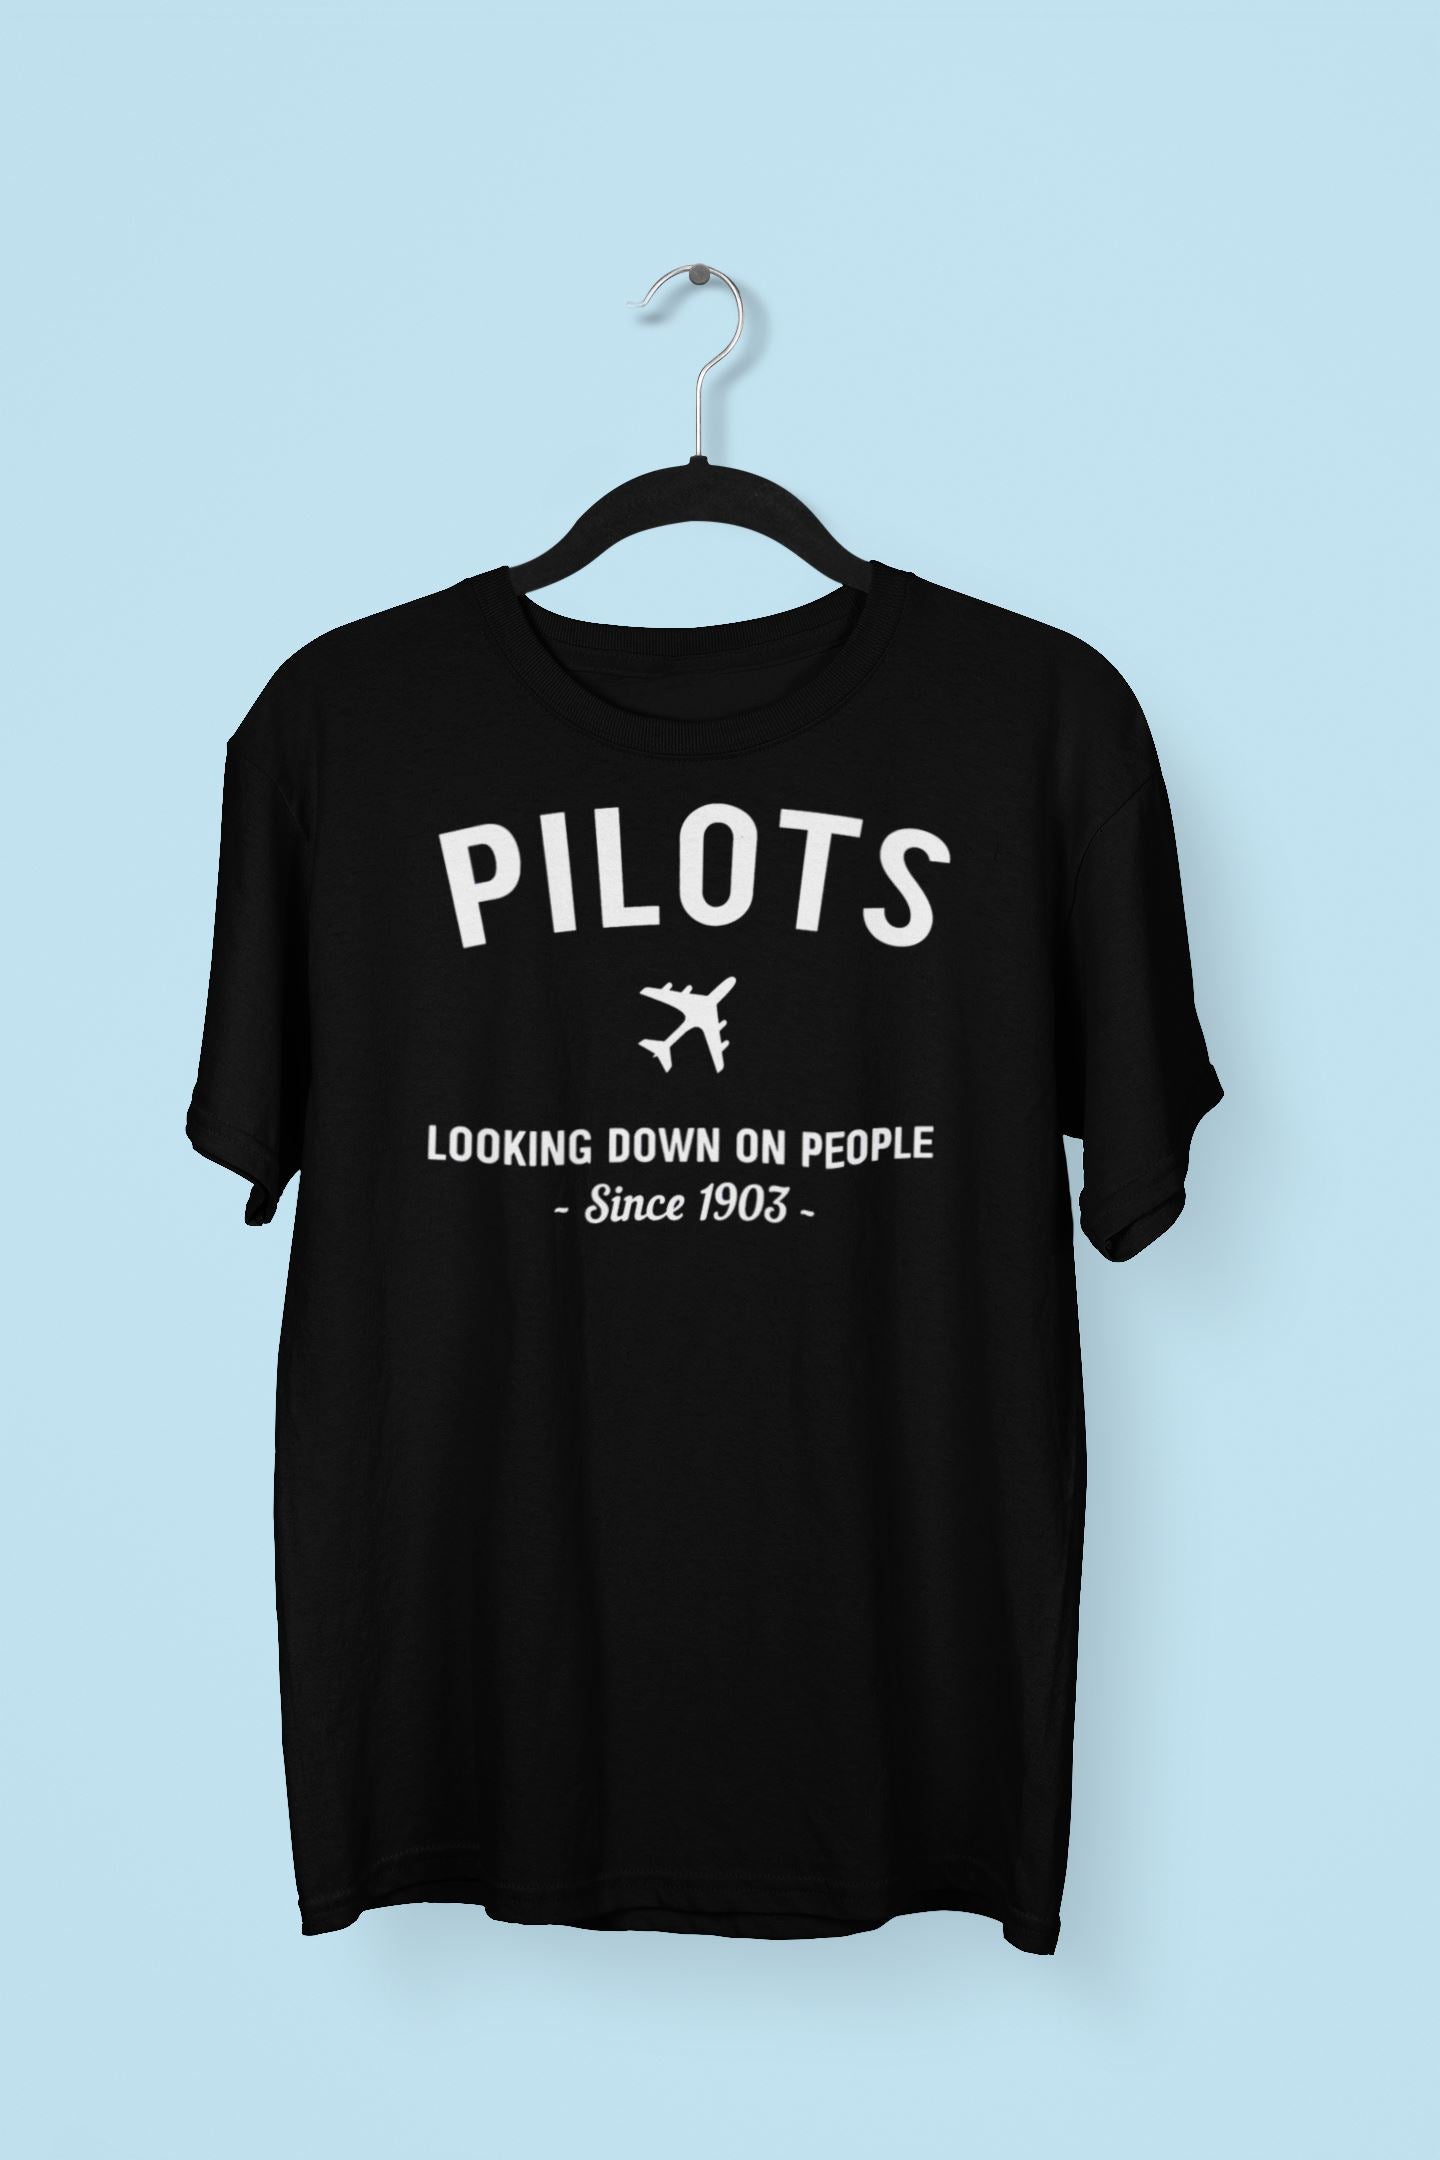 Pilots Looking Down on People Since 1903 Exclusive Navy Blue T Shirt for Men and Women Printrove Black S 